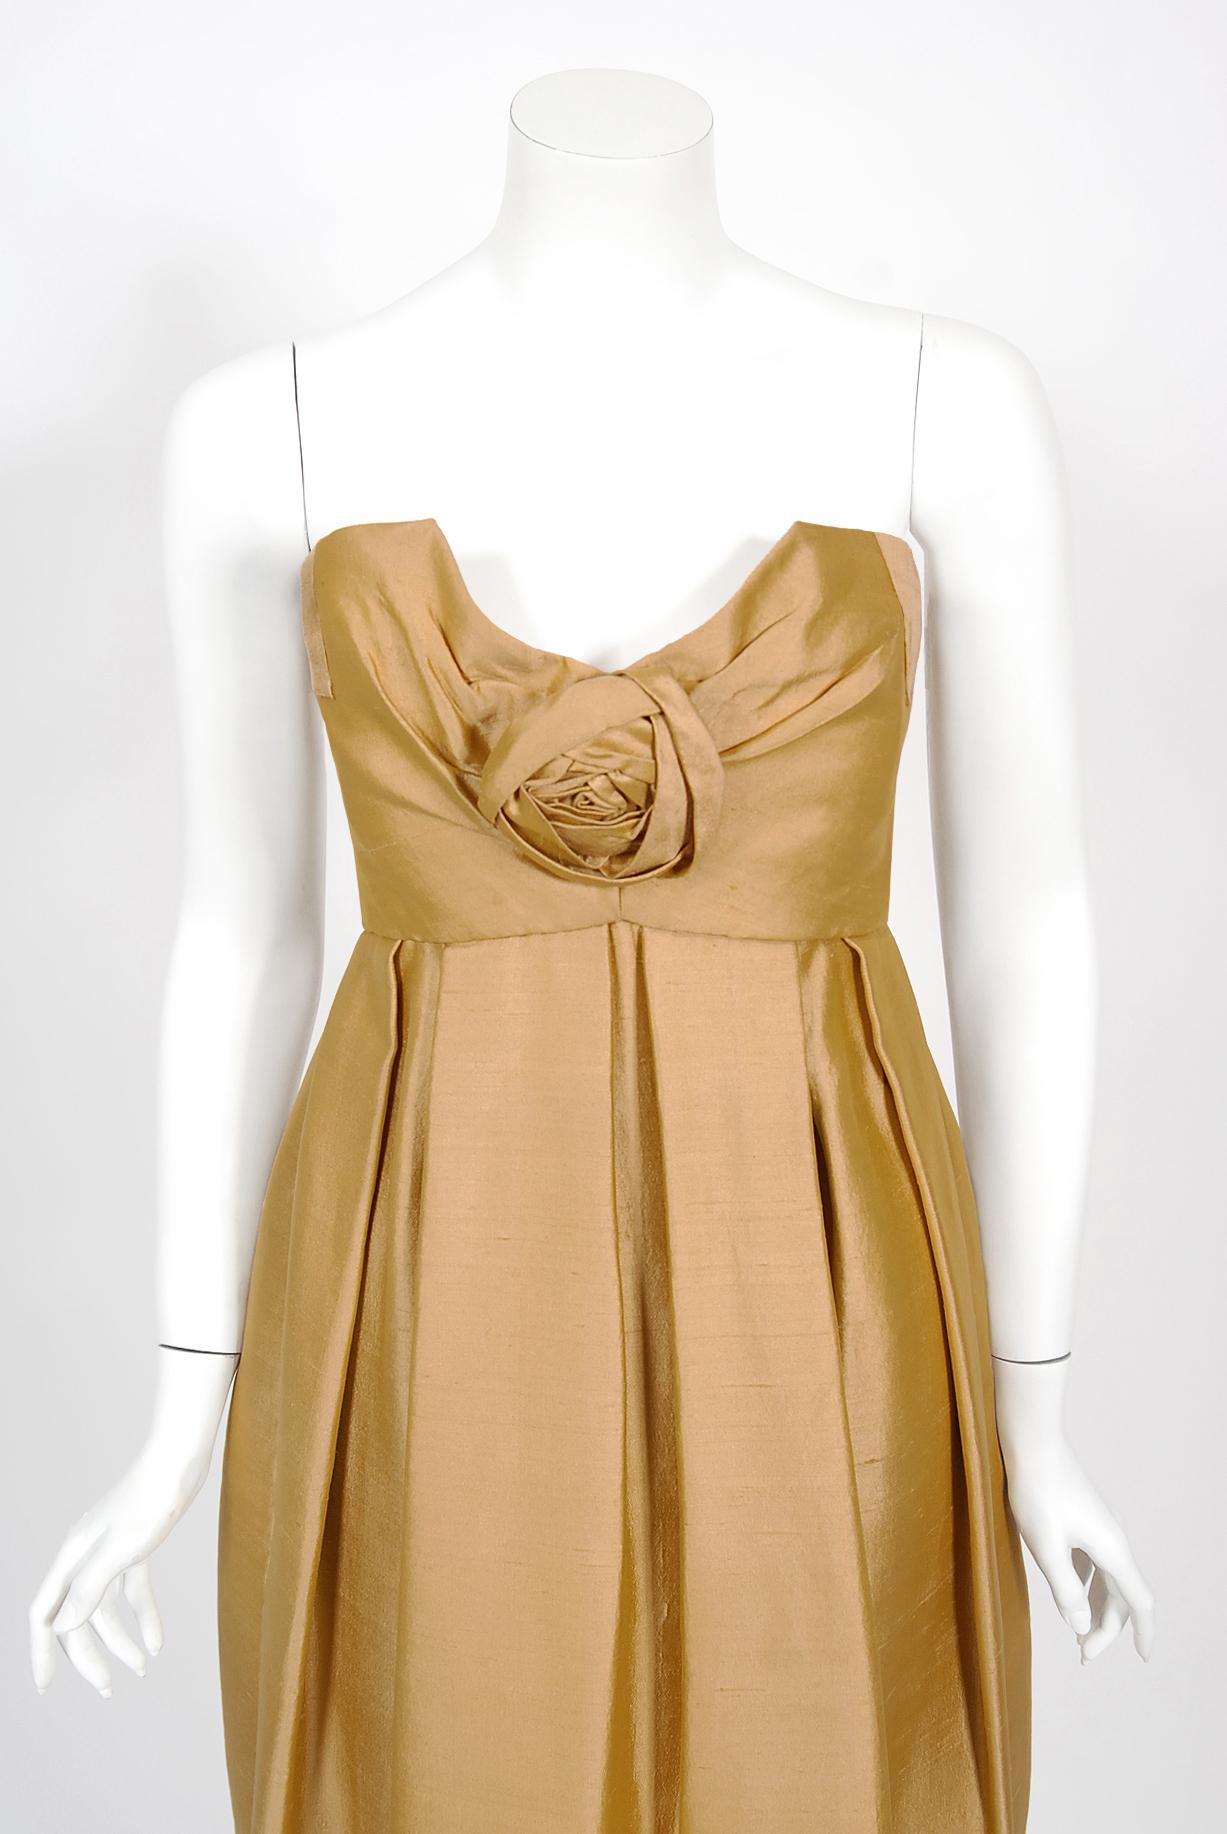 We are pleased to offer this important and incredibly rare golden dupioni silk party dress from Yves Saint Laurent was head designer for Christian Dior's fall-winter 1958 collection. Yves Saint Laurent continued the Dior tradition of elegant